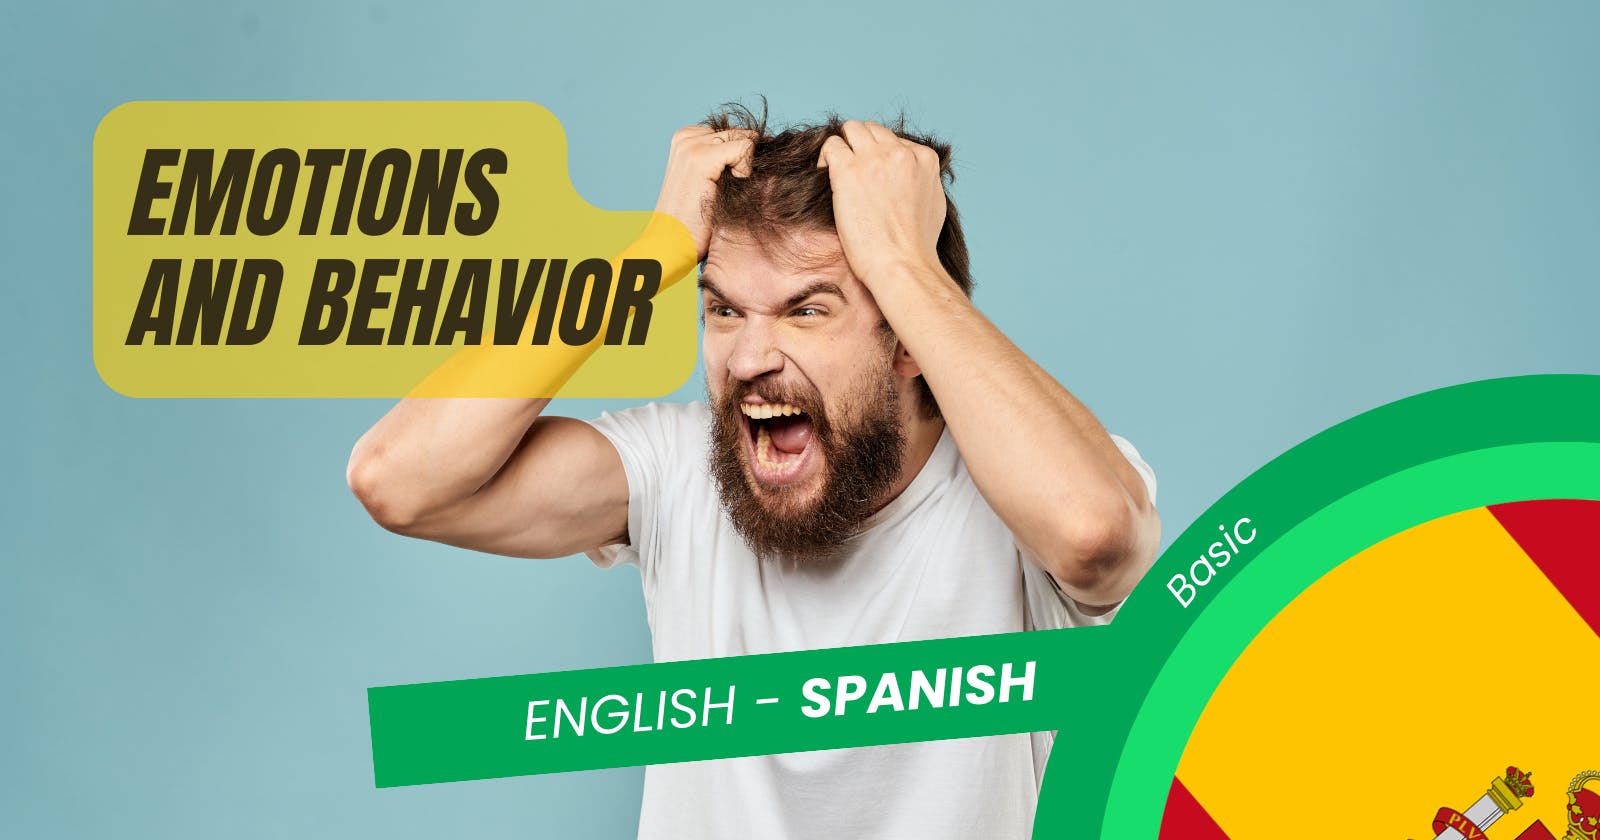 🇪🇸 Learn to Describe Feelings and Behaviors in Easy Spanish